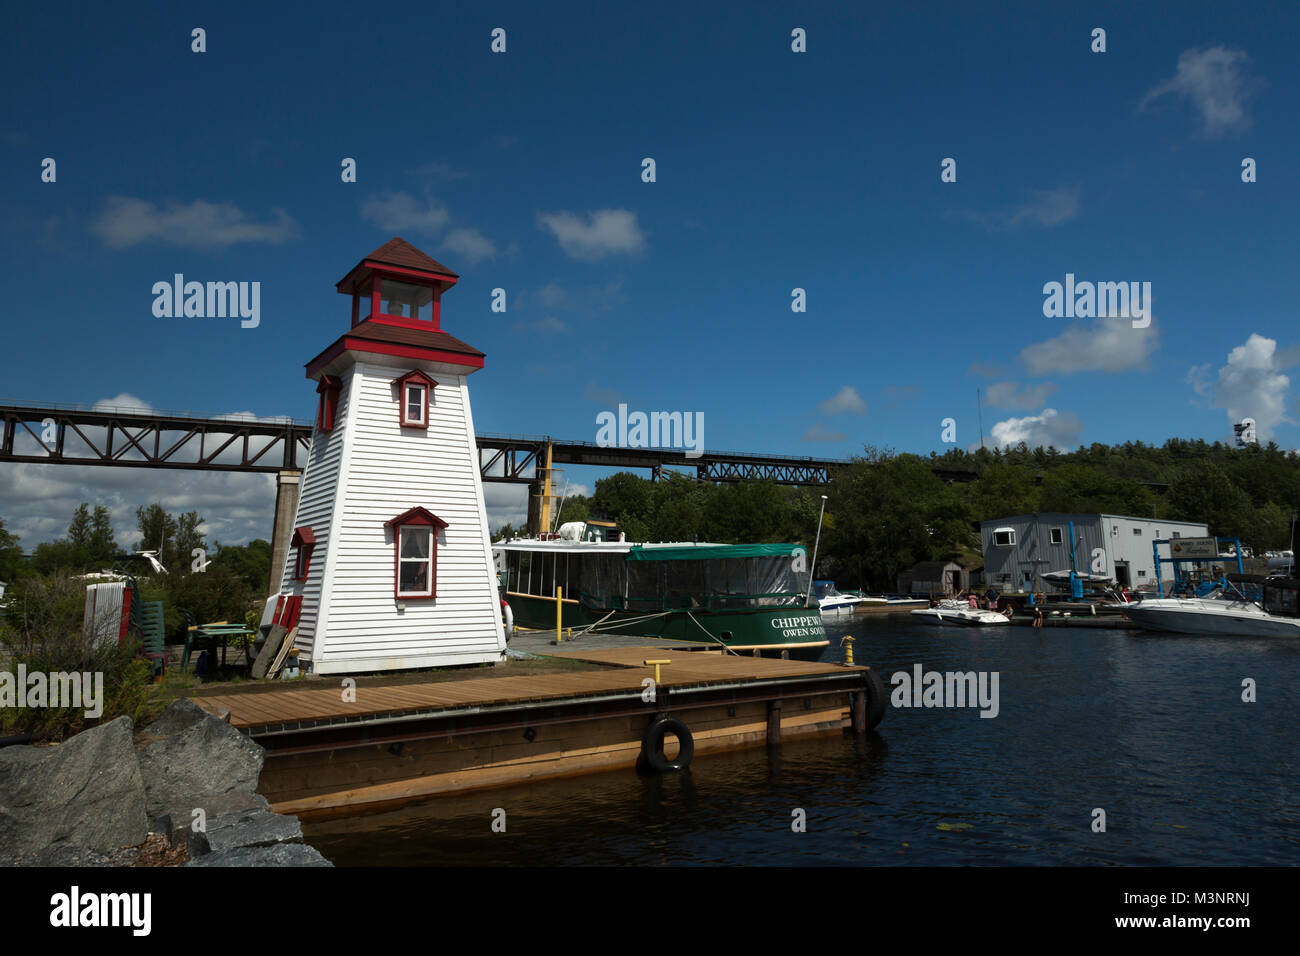 Waterfront lighthouse on dock, train trestle, boats sunny blue sky in background Summer in Georgian Bay National Park Parry Sound Ontario Canada Stock Photo